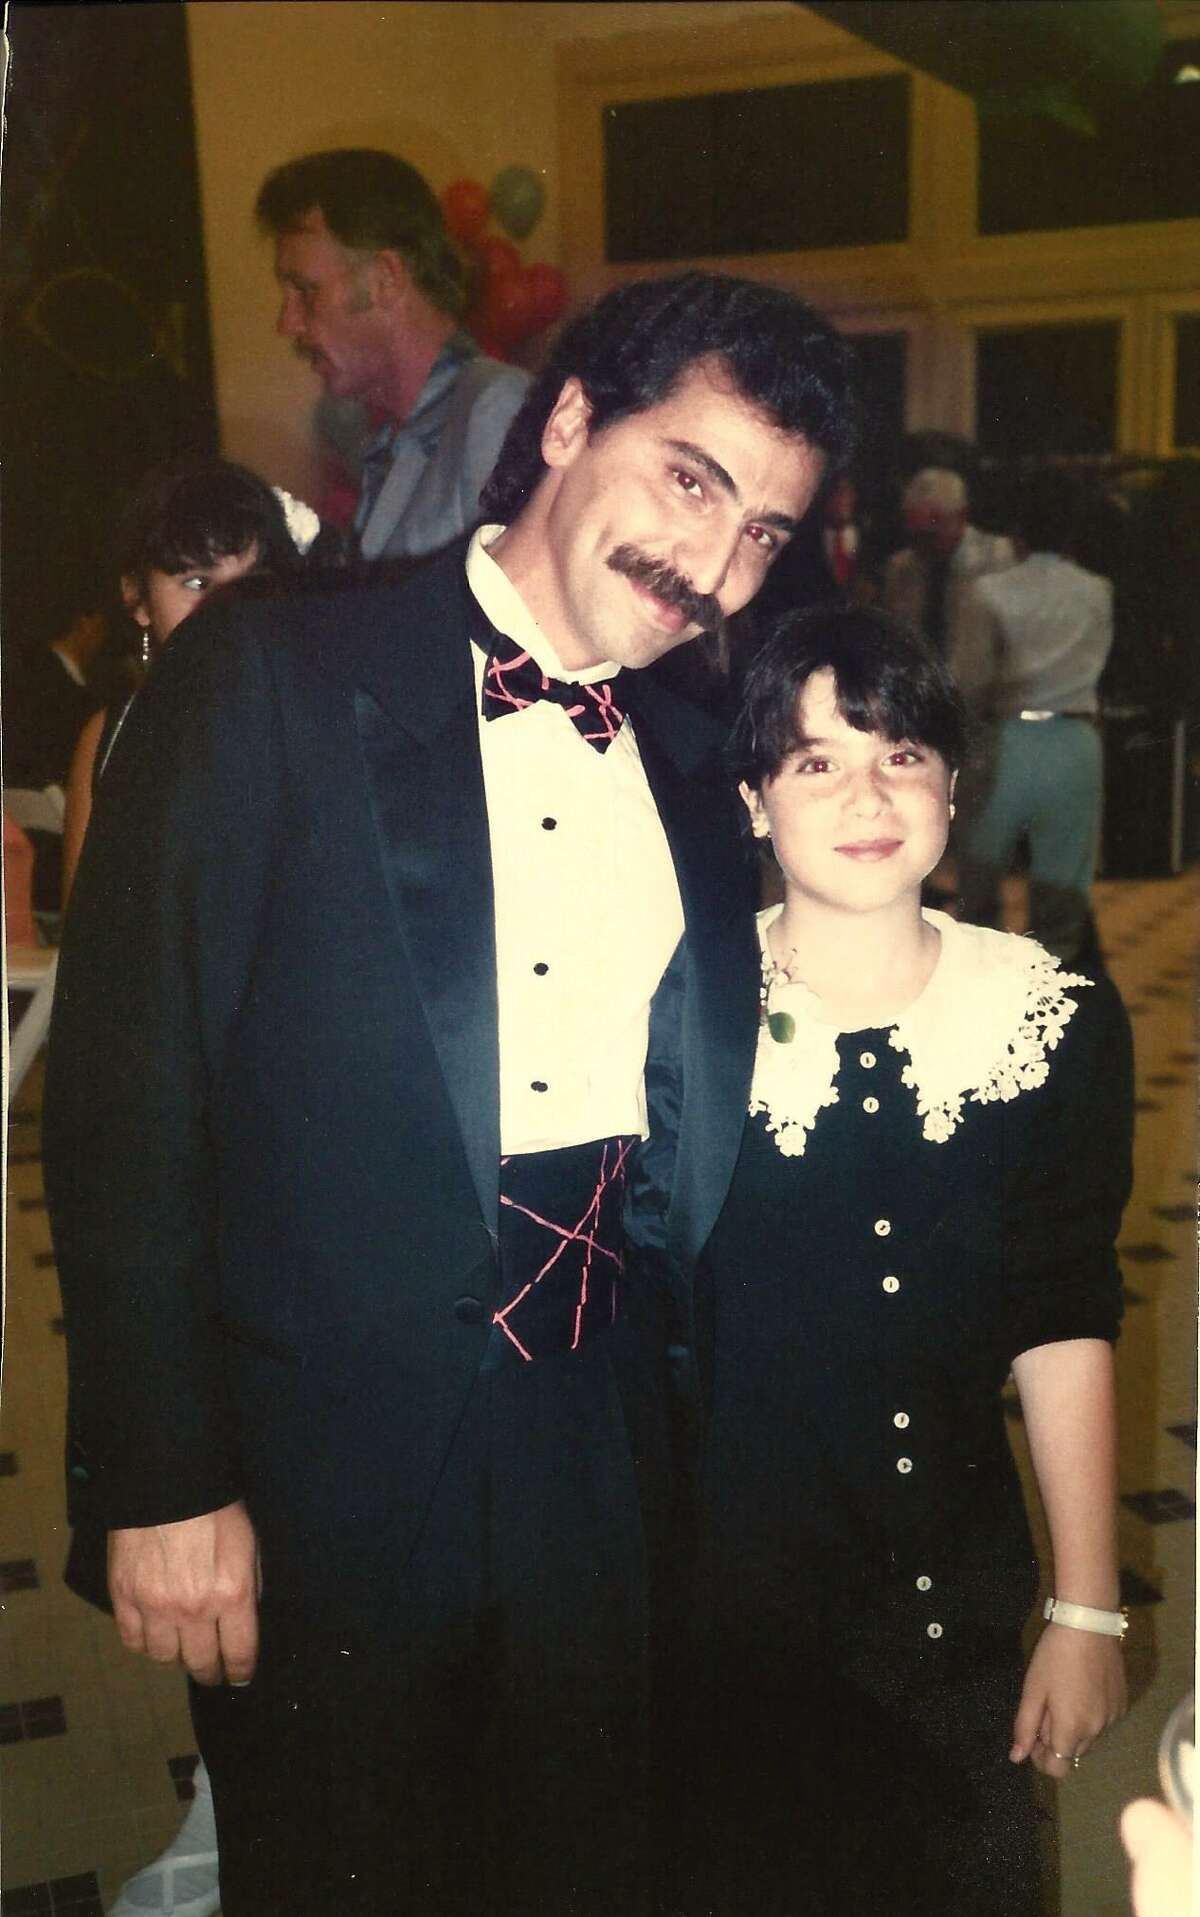 Nash D'Amico with his daughter, Brina D'Amico, as a child